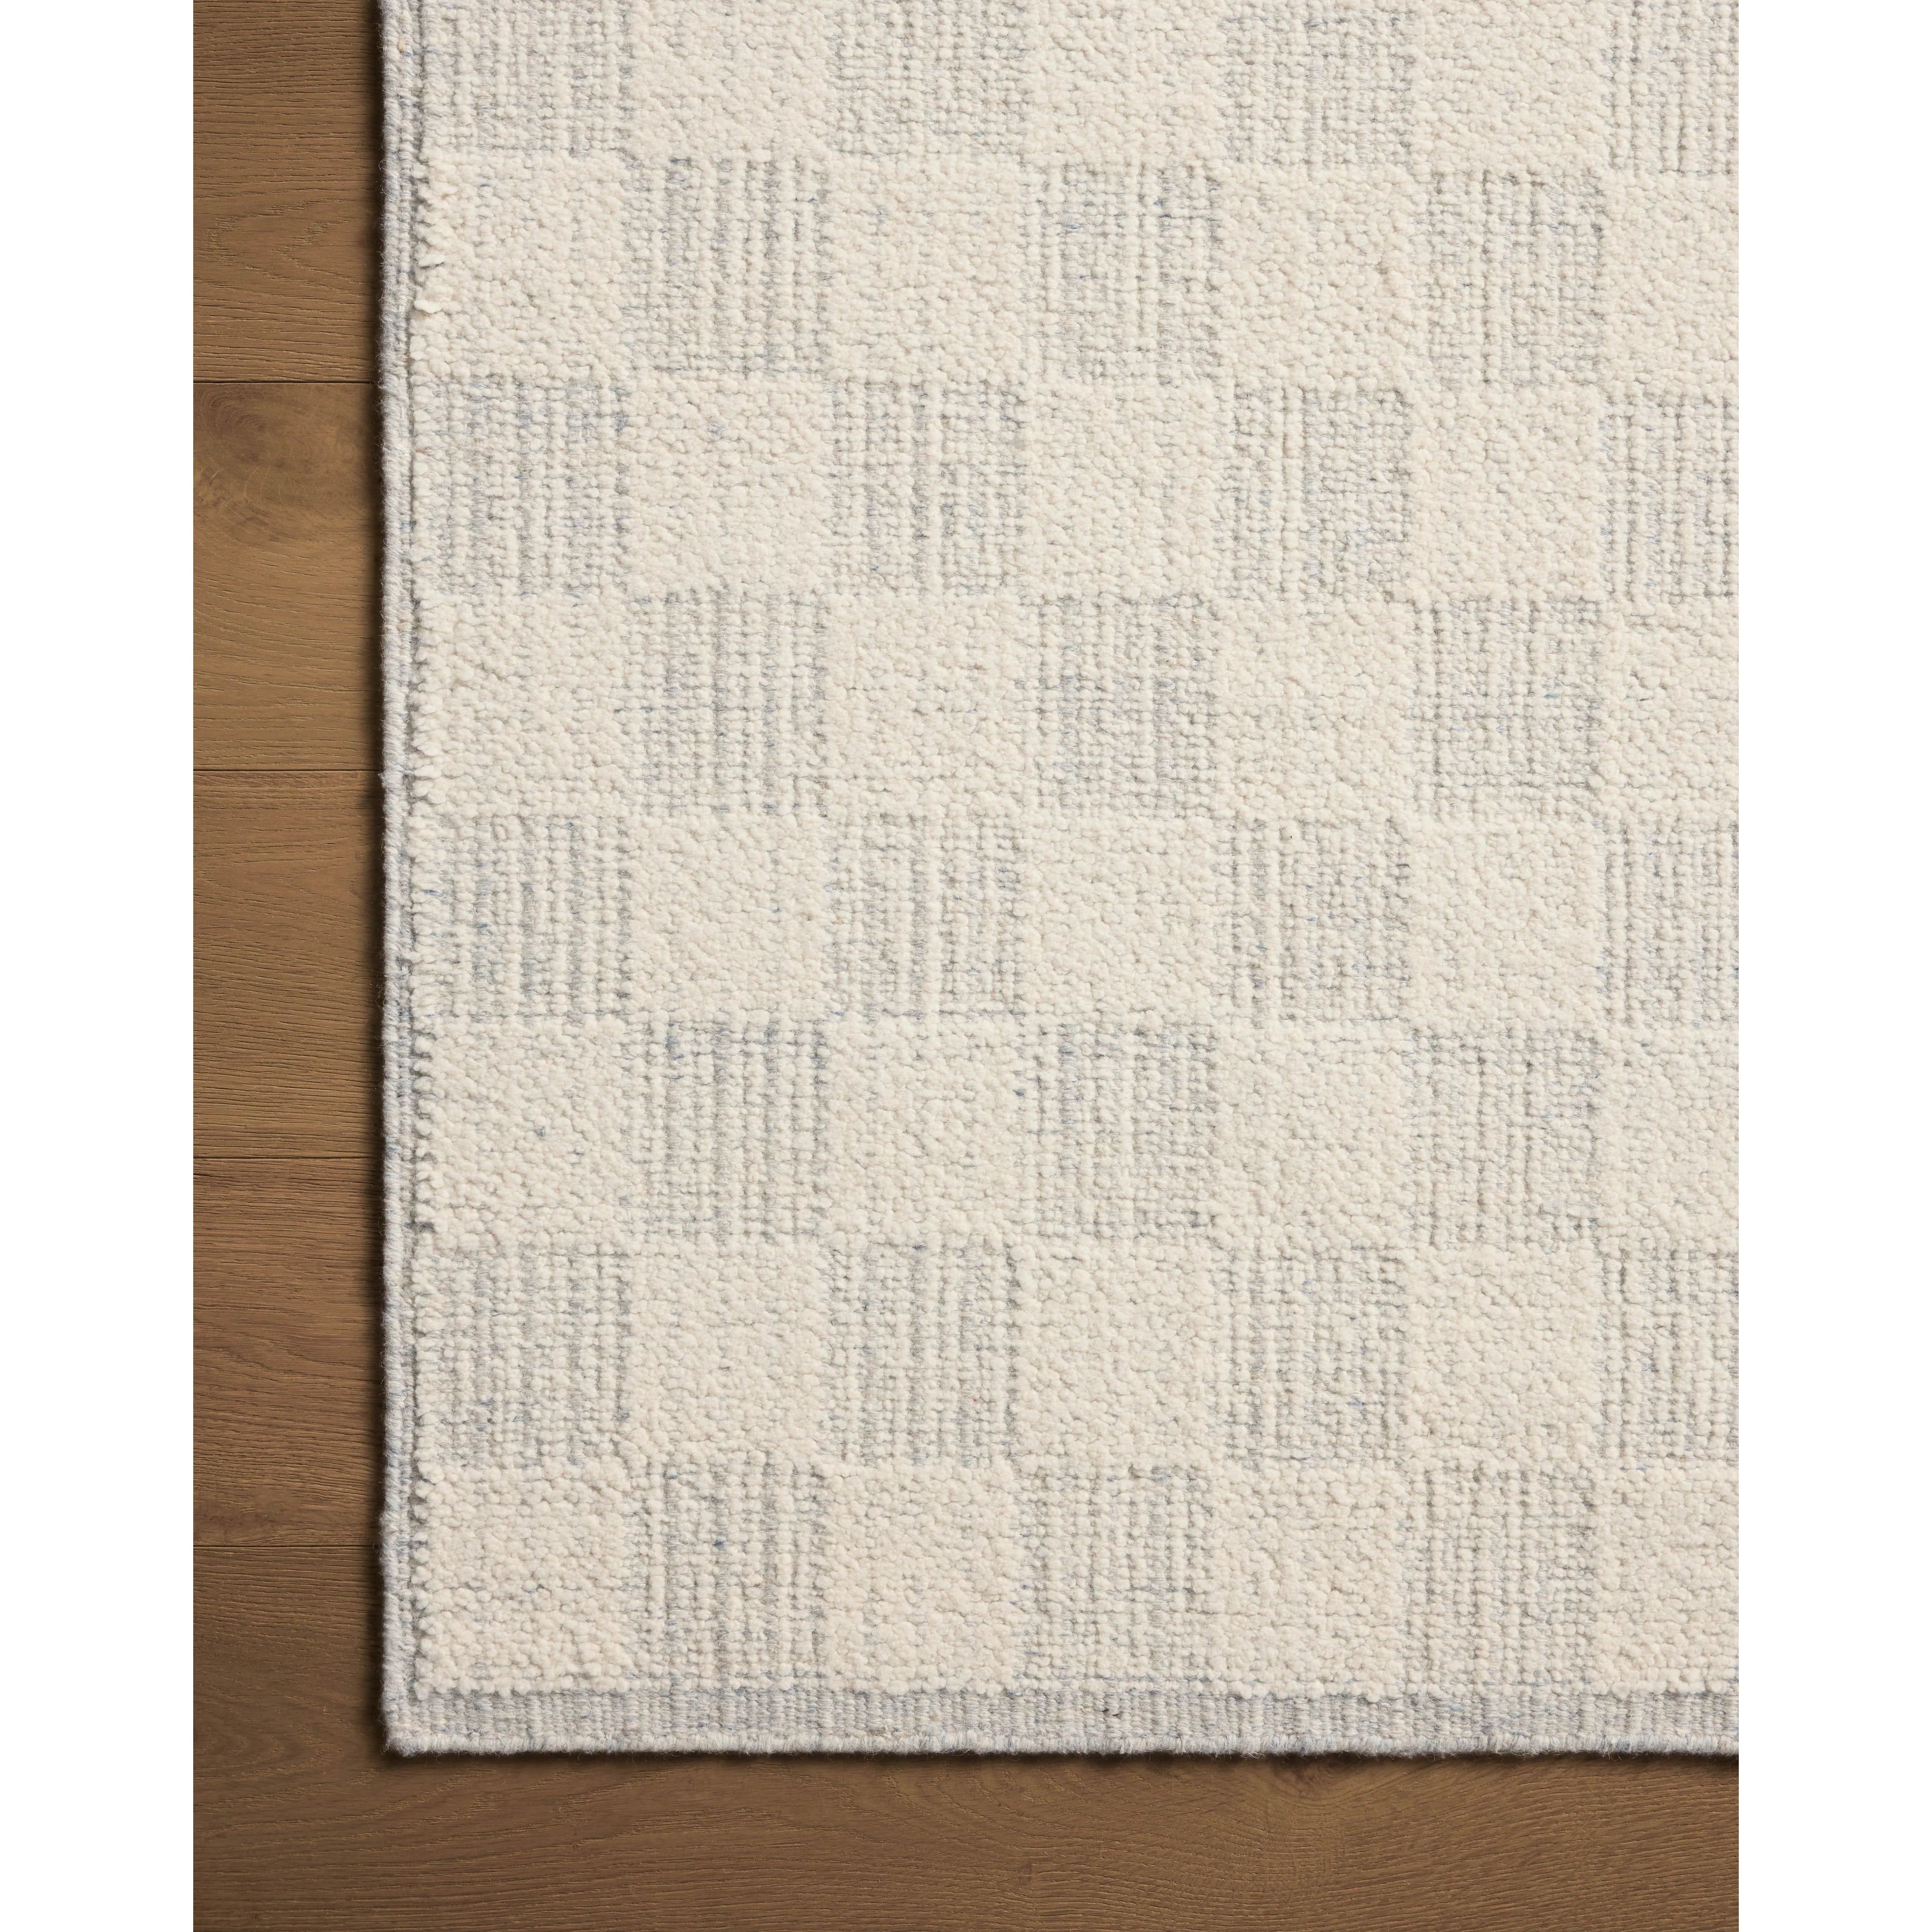 The Knox Ivory / Sky Rug by Brigette Romanek x Loloi is a handwoven area rug with a contemporary checkerboard pattern and a texture reminiscent of a luxurious knit sweater. Made of a blend of wool and cotton that plays with scale and texture, Knox is imbued with cozy luxury that can anchor any room. Amethyst Home provides interior design, new home construction design consulting, vintage area rugs, and lighting in the Austin metro area.